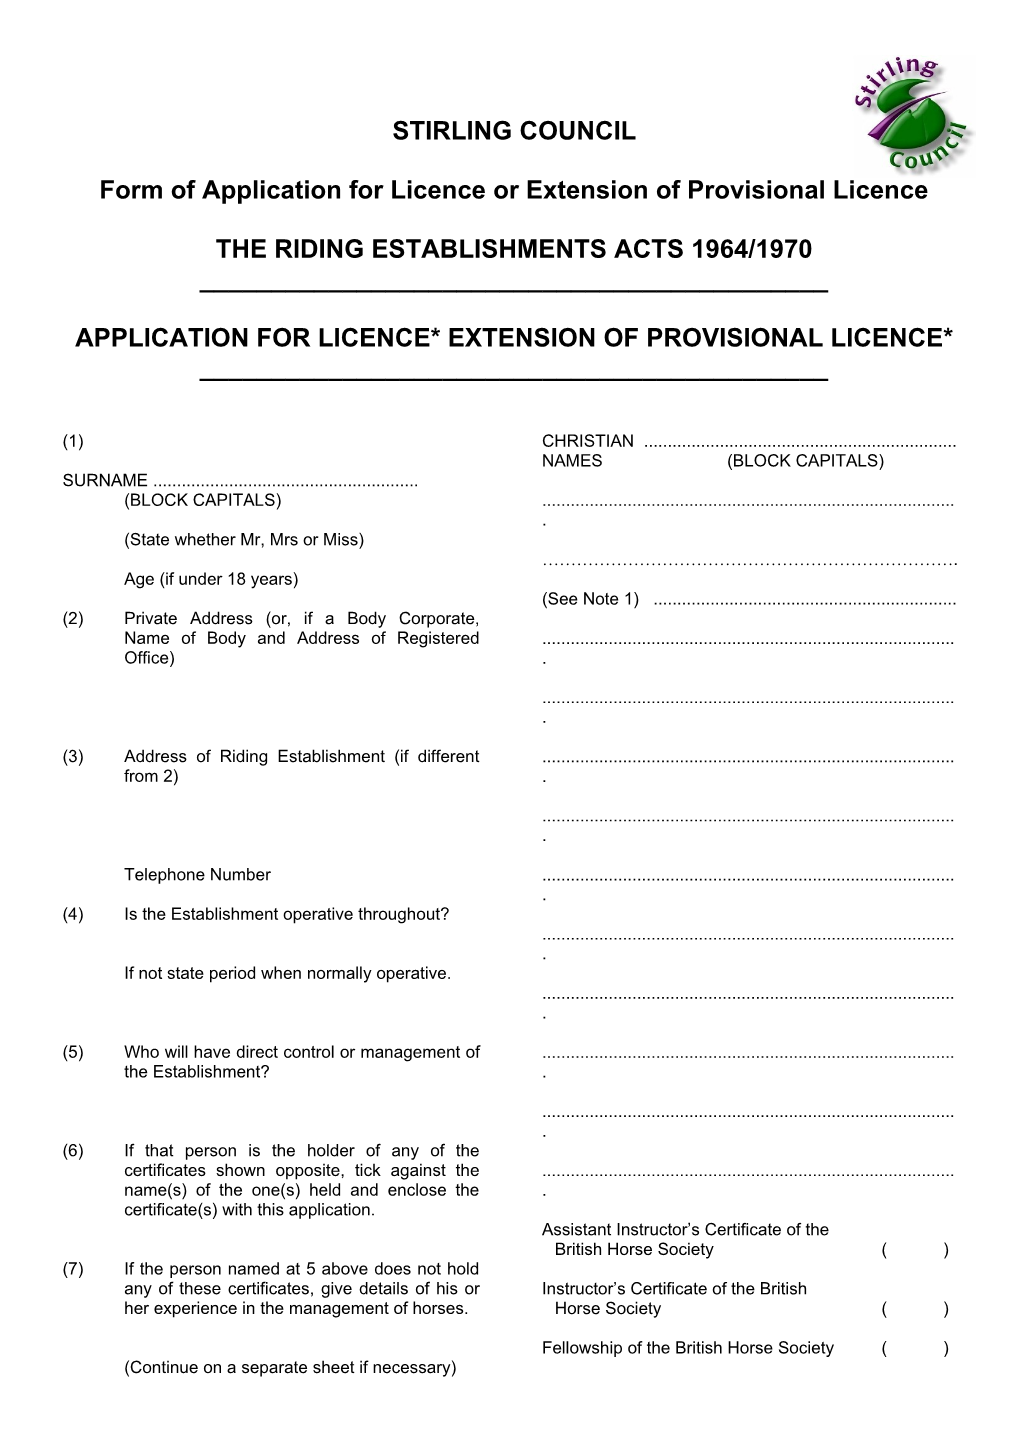 Form of Application for Licence Or Extension of Provisional Licence